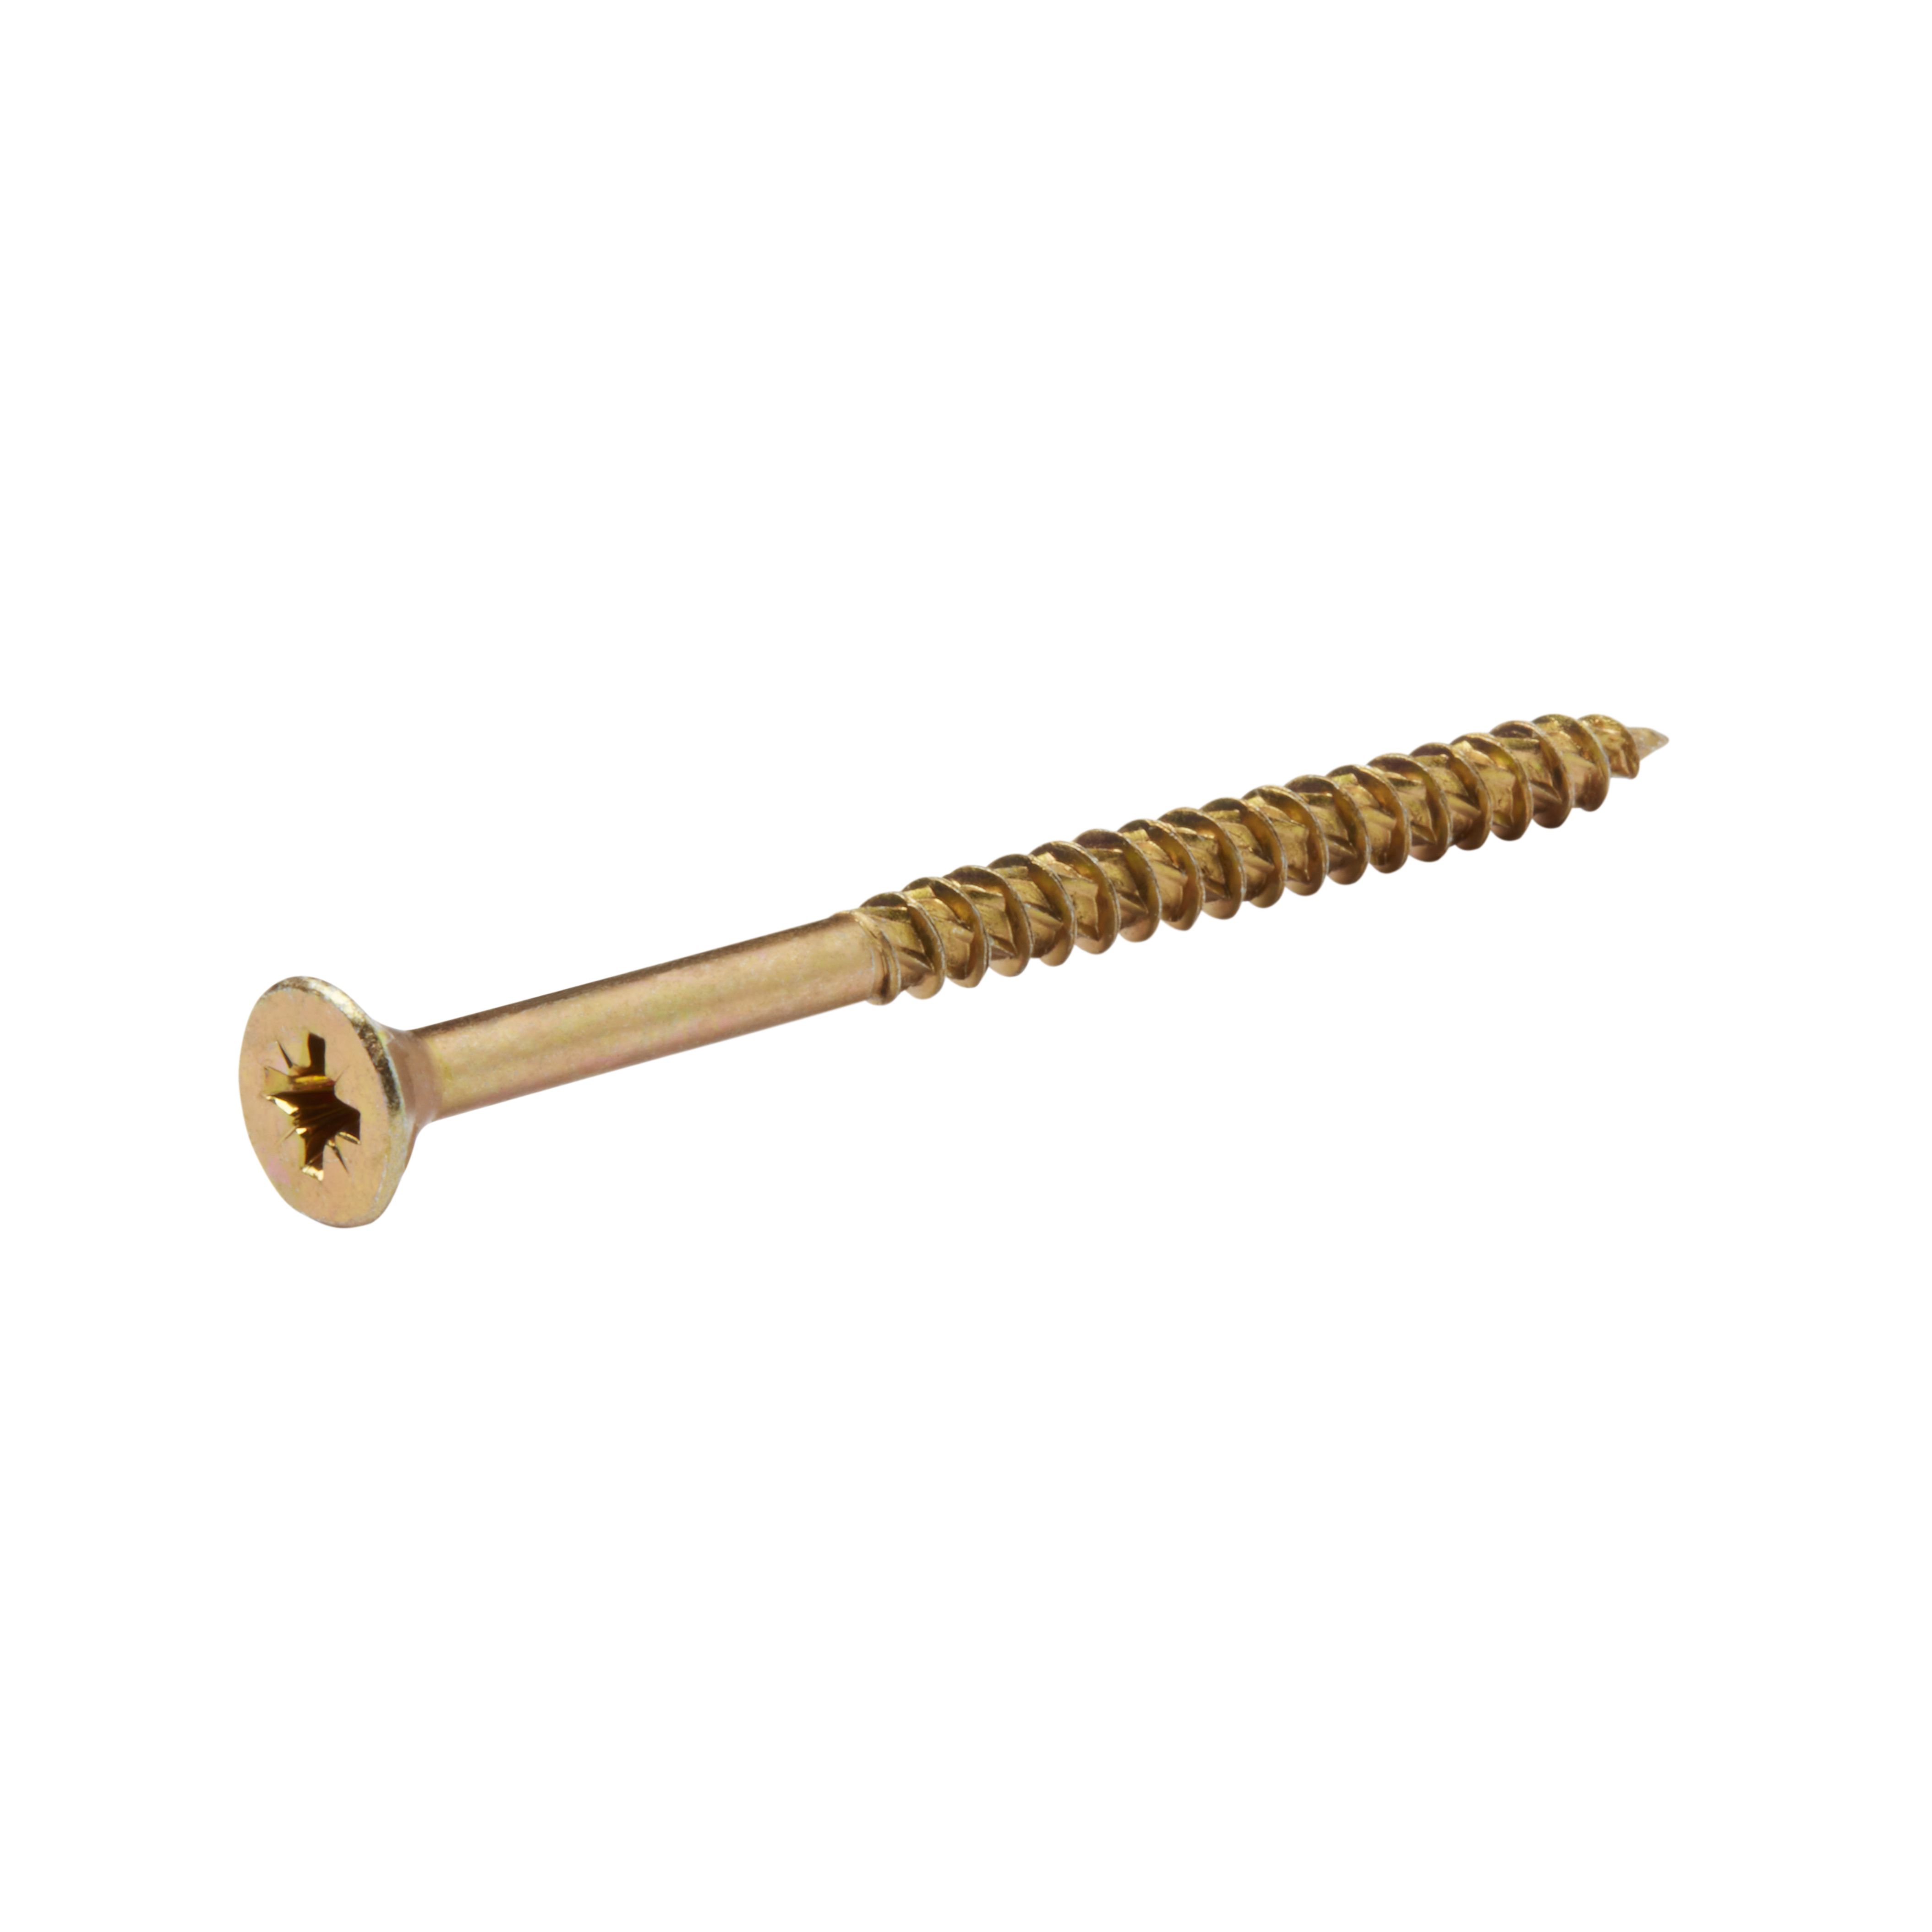 TurboDrive Assorted wood screw TX Yellow-passivated Steel Screw, Pack of 300